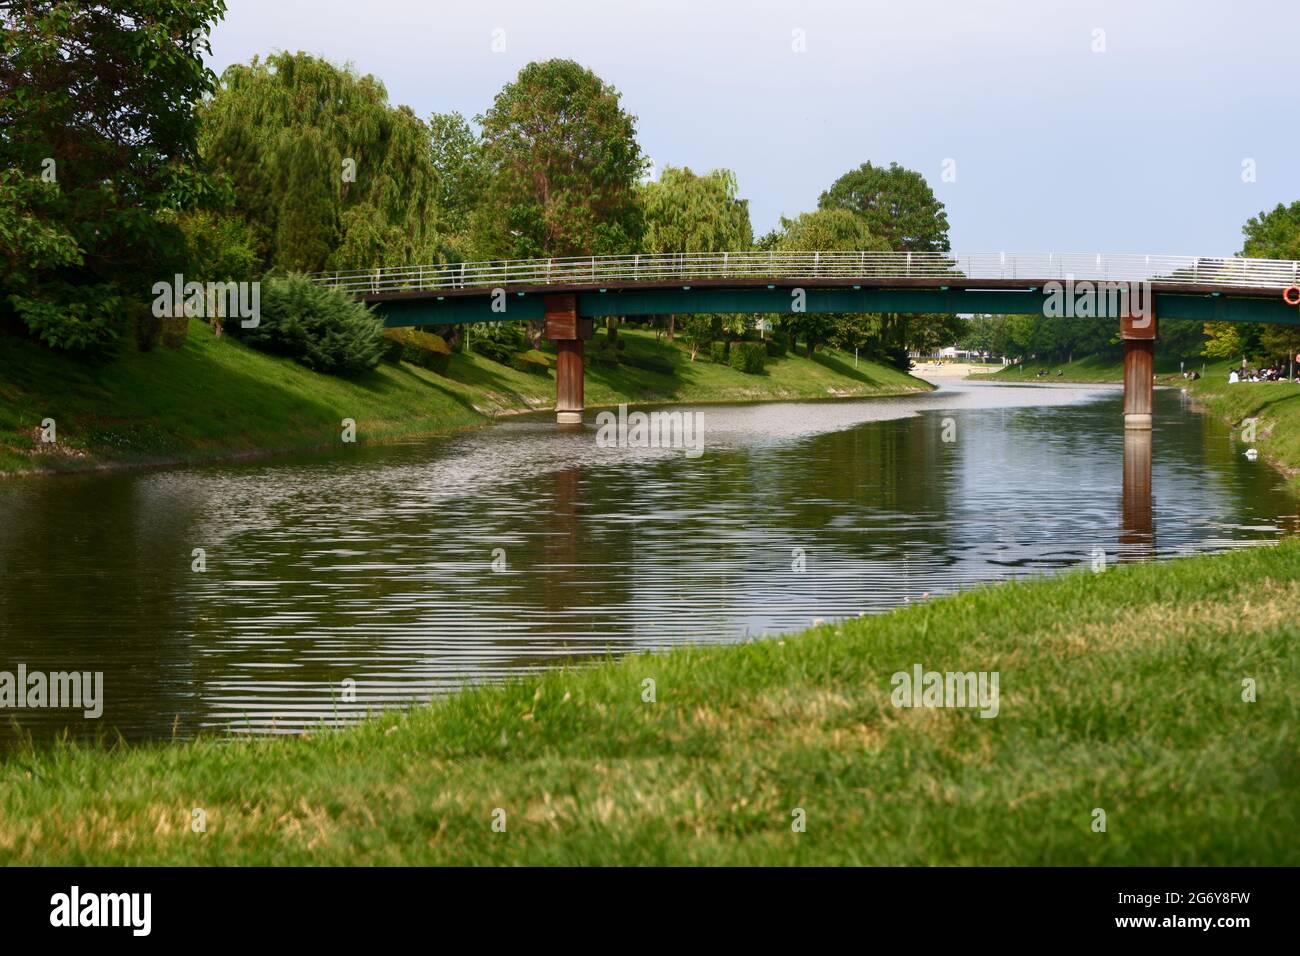 Small Bridge over River with trees and Grass at Summer Stock Photo